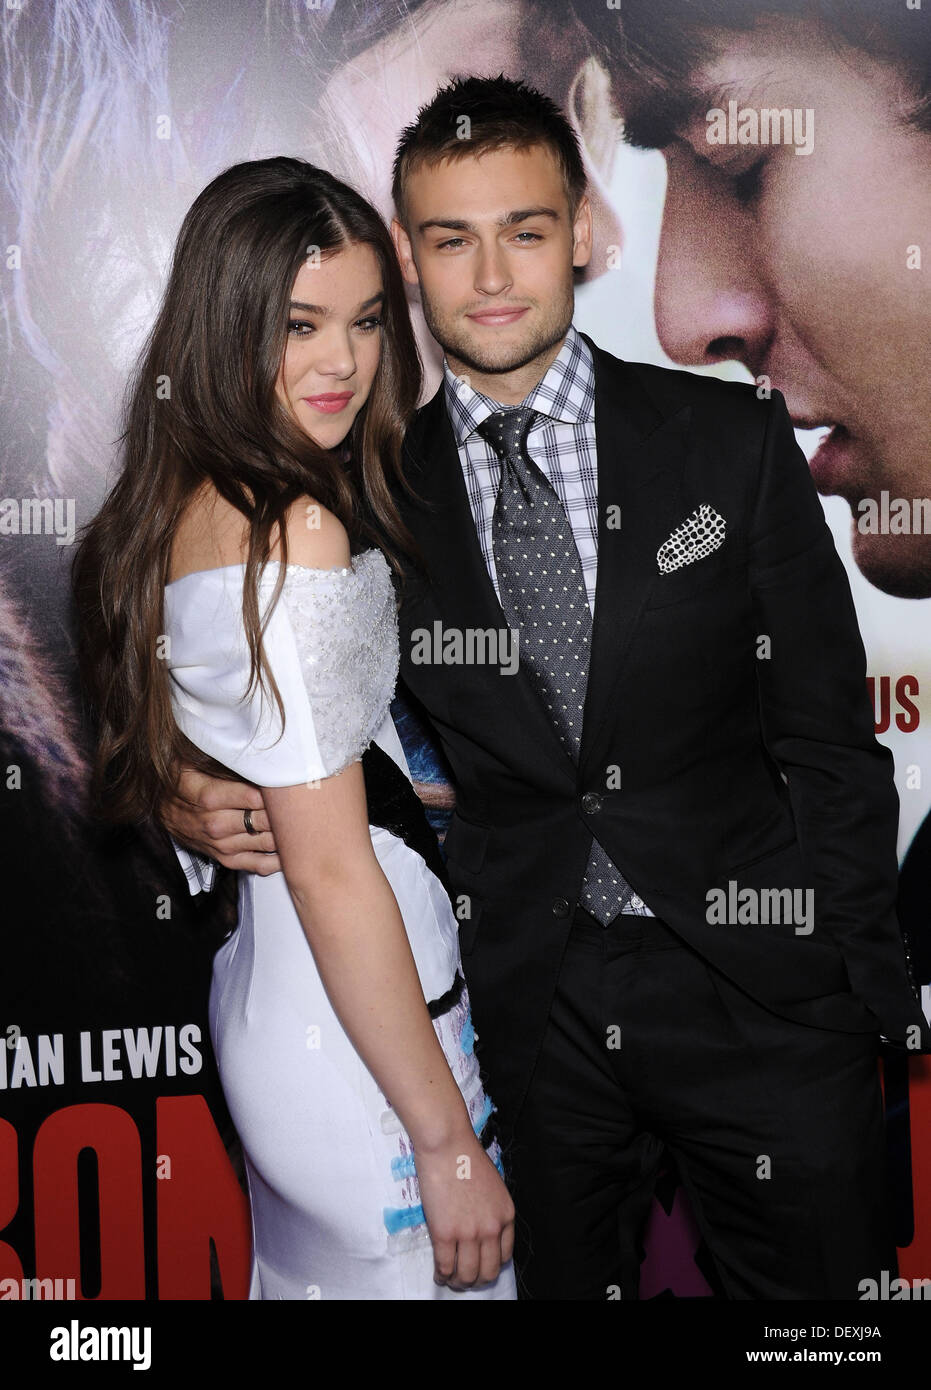 Hollywood, California, USA. 24th Sep, 2013. Hailee Steinfeld & Douglas Booth arrives for the premiere of the film 'Romeo & Juliet' at the Arclight theater. © Lisa O'Connor/ZUMAPRESS.com/Alamy Live News Stock Photo